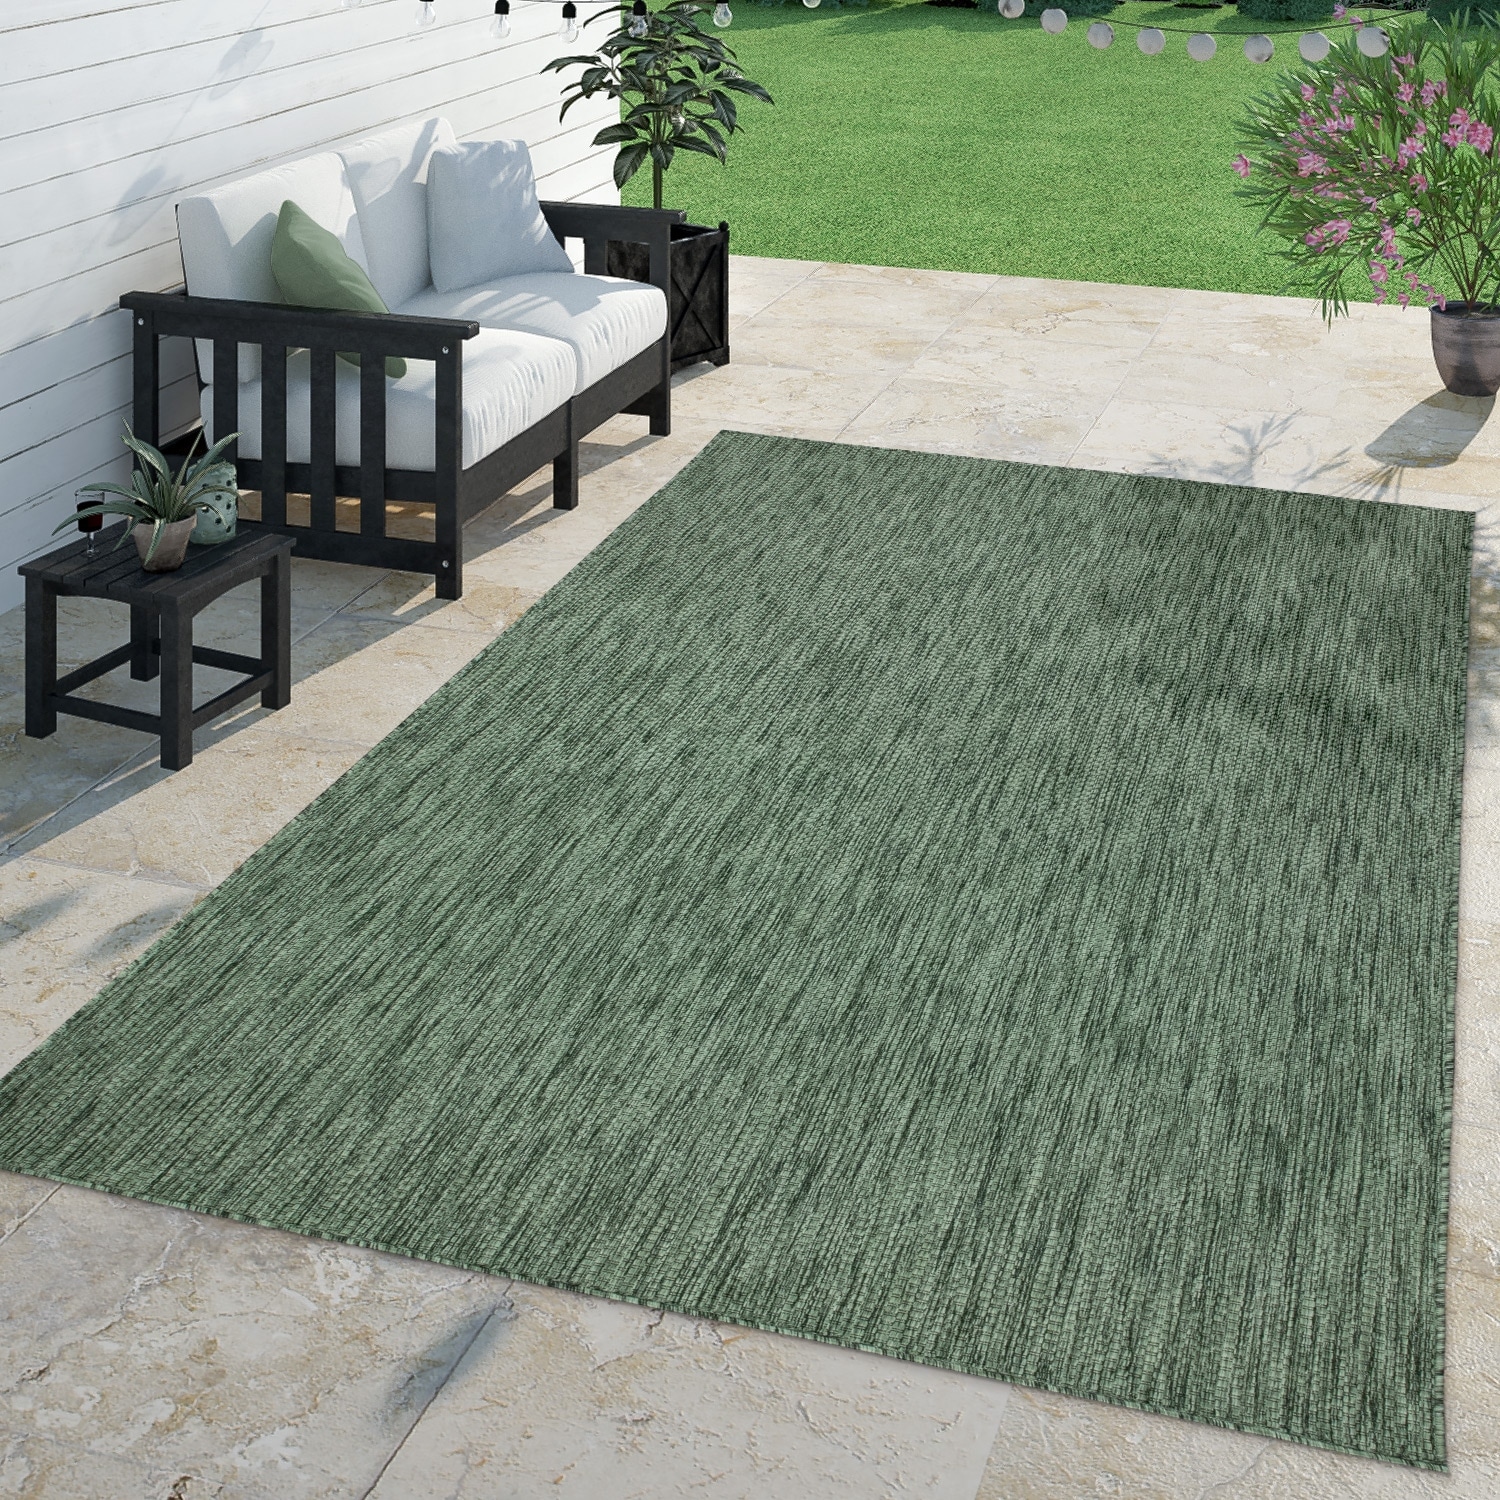 https://ak1.ostkcdn.com/images/products/is/images/direct/016439e135b98401d0e8db7449e3f2f5e432b851/Solid-Outdoor-Rug-Waterproof-for-Patio-in-different-plain-colors.jpg